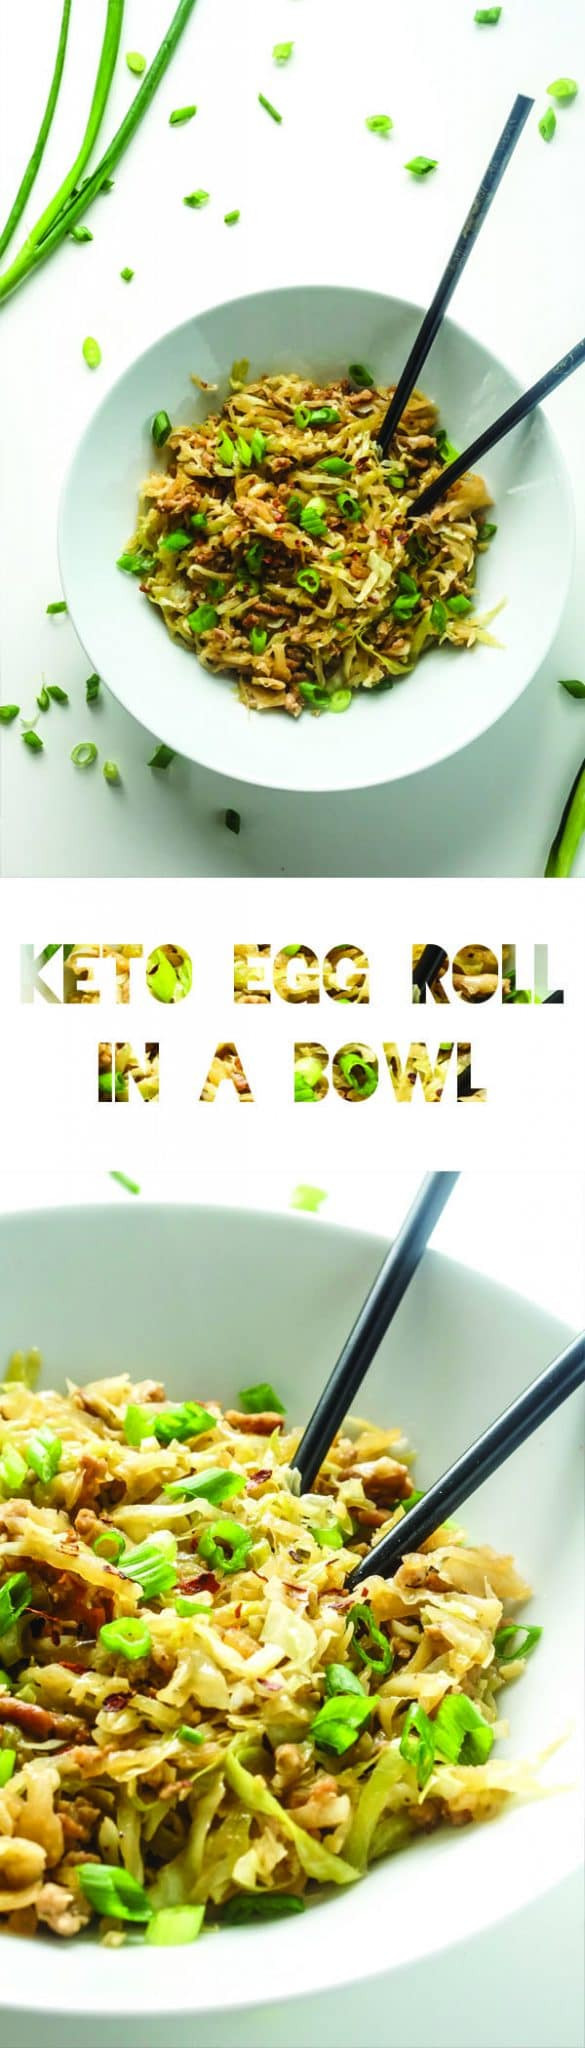 Low Carb Keto Egg Roll In A Bowl
 Keto Egg Roll in a Bowl [Recipe] KETOGASM